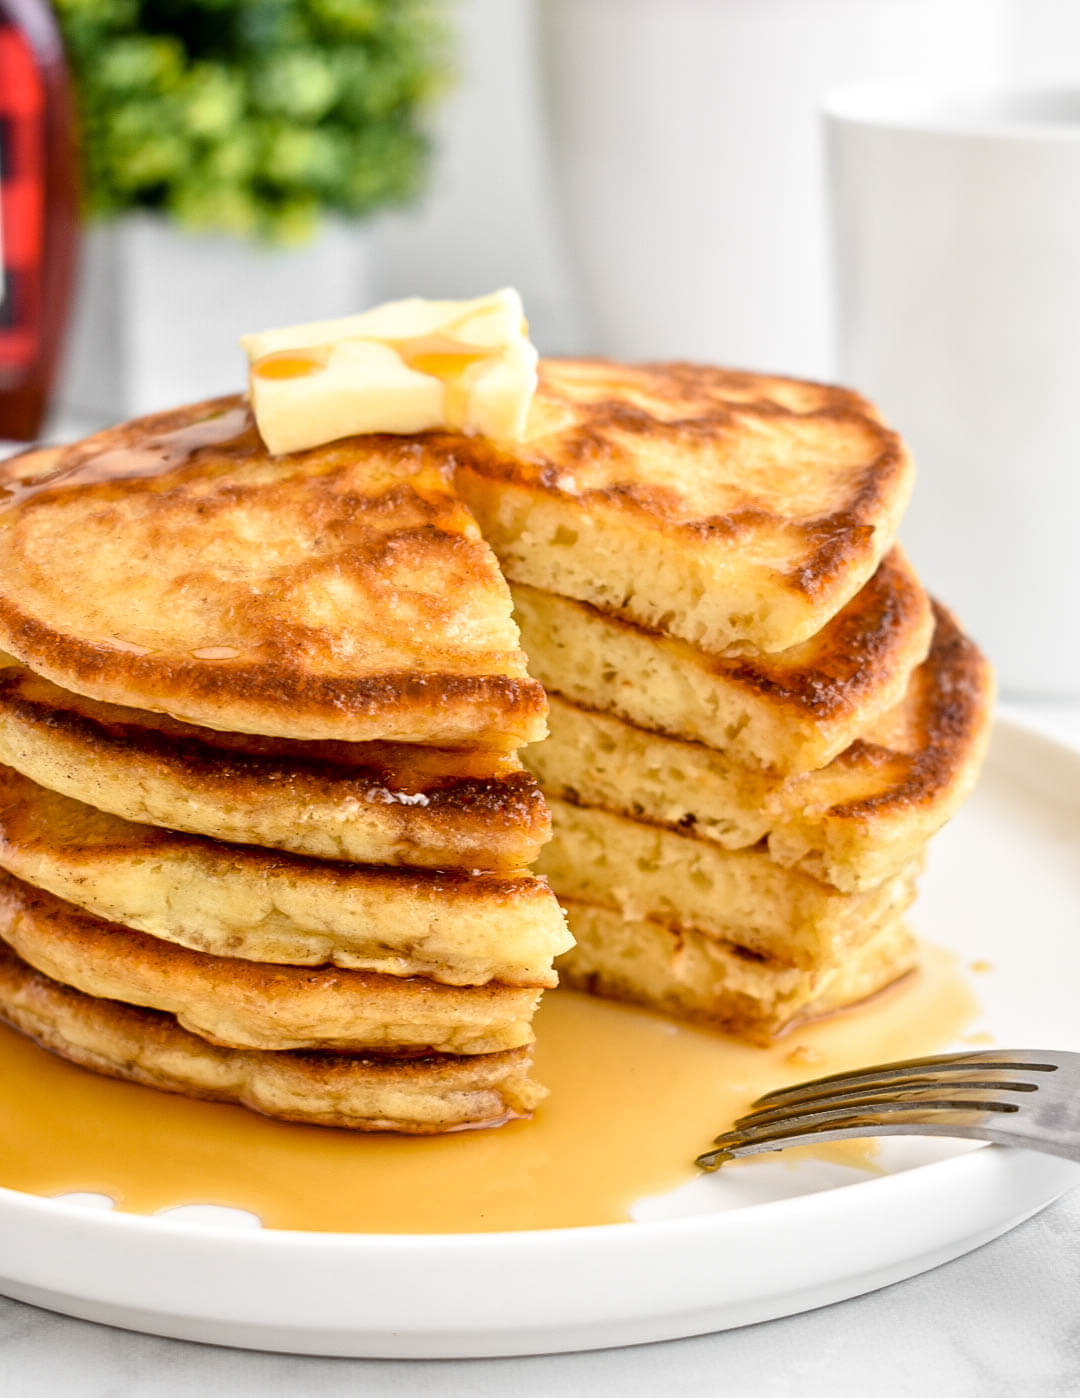 A stack of buttermilk pancakes topped with a pat of butter and maple syrup and cut into to reveal the fluffy interior.